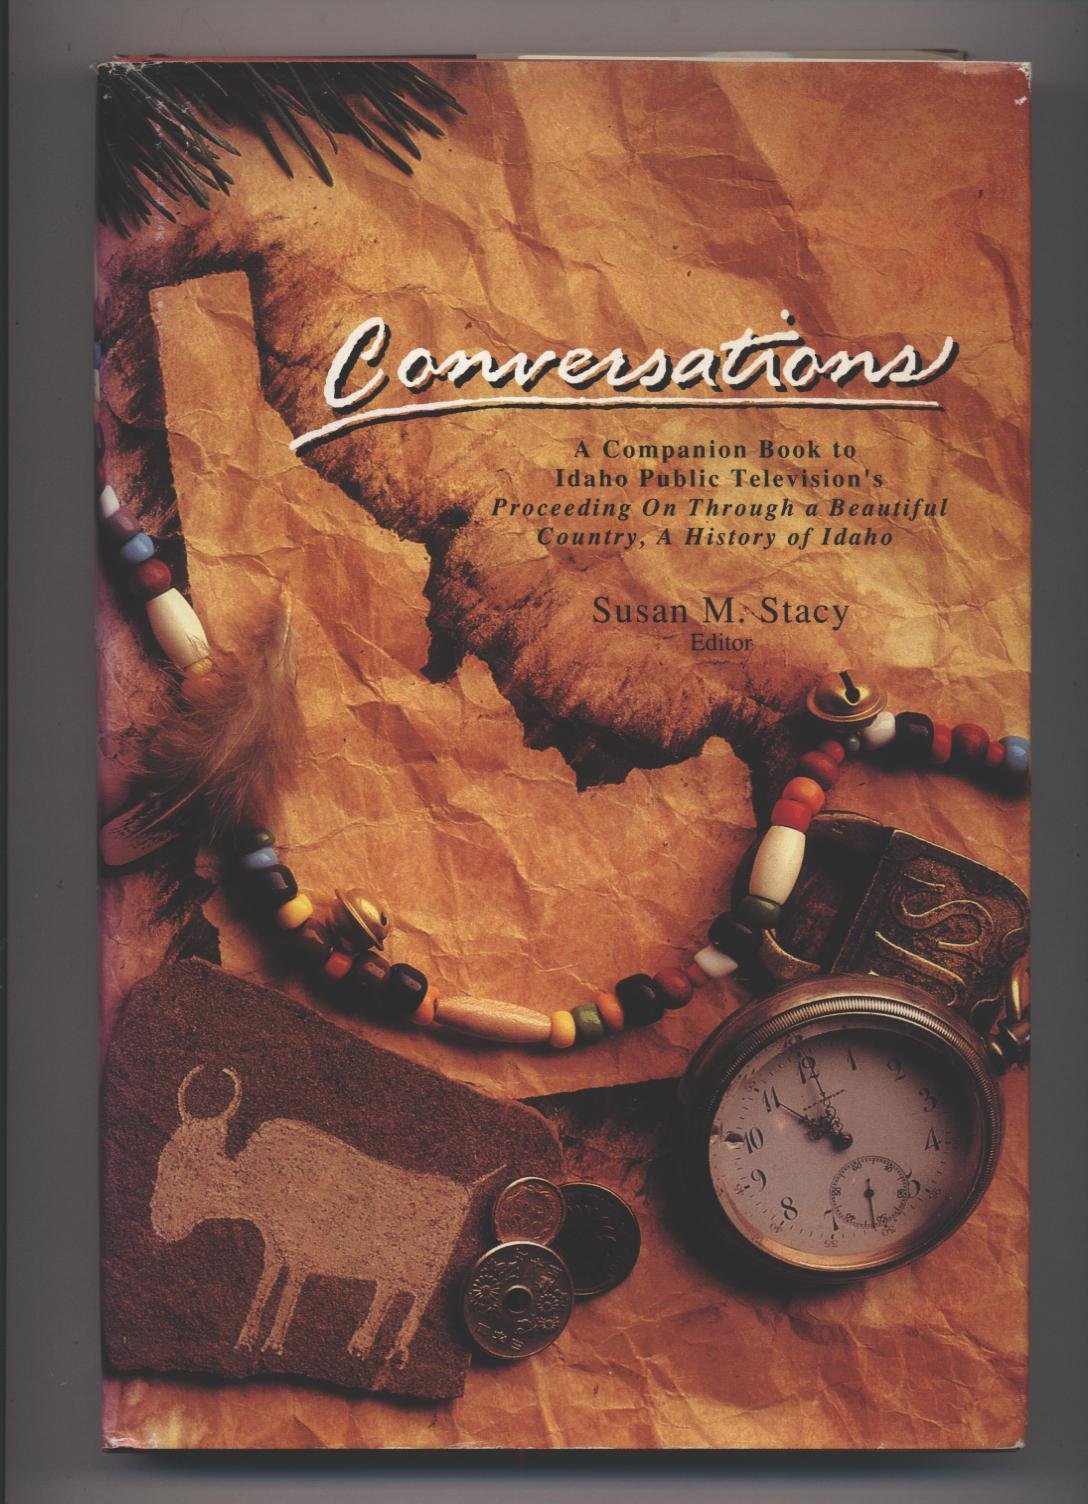 Conversations: A companion book to Idaho Public Television's Proceeding on through a beautiful country : a history of Idaho (book cover)